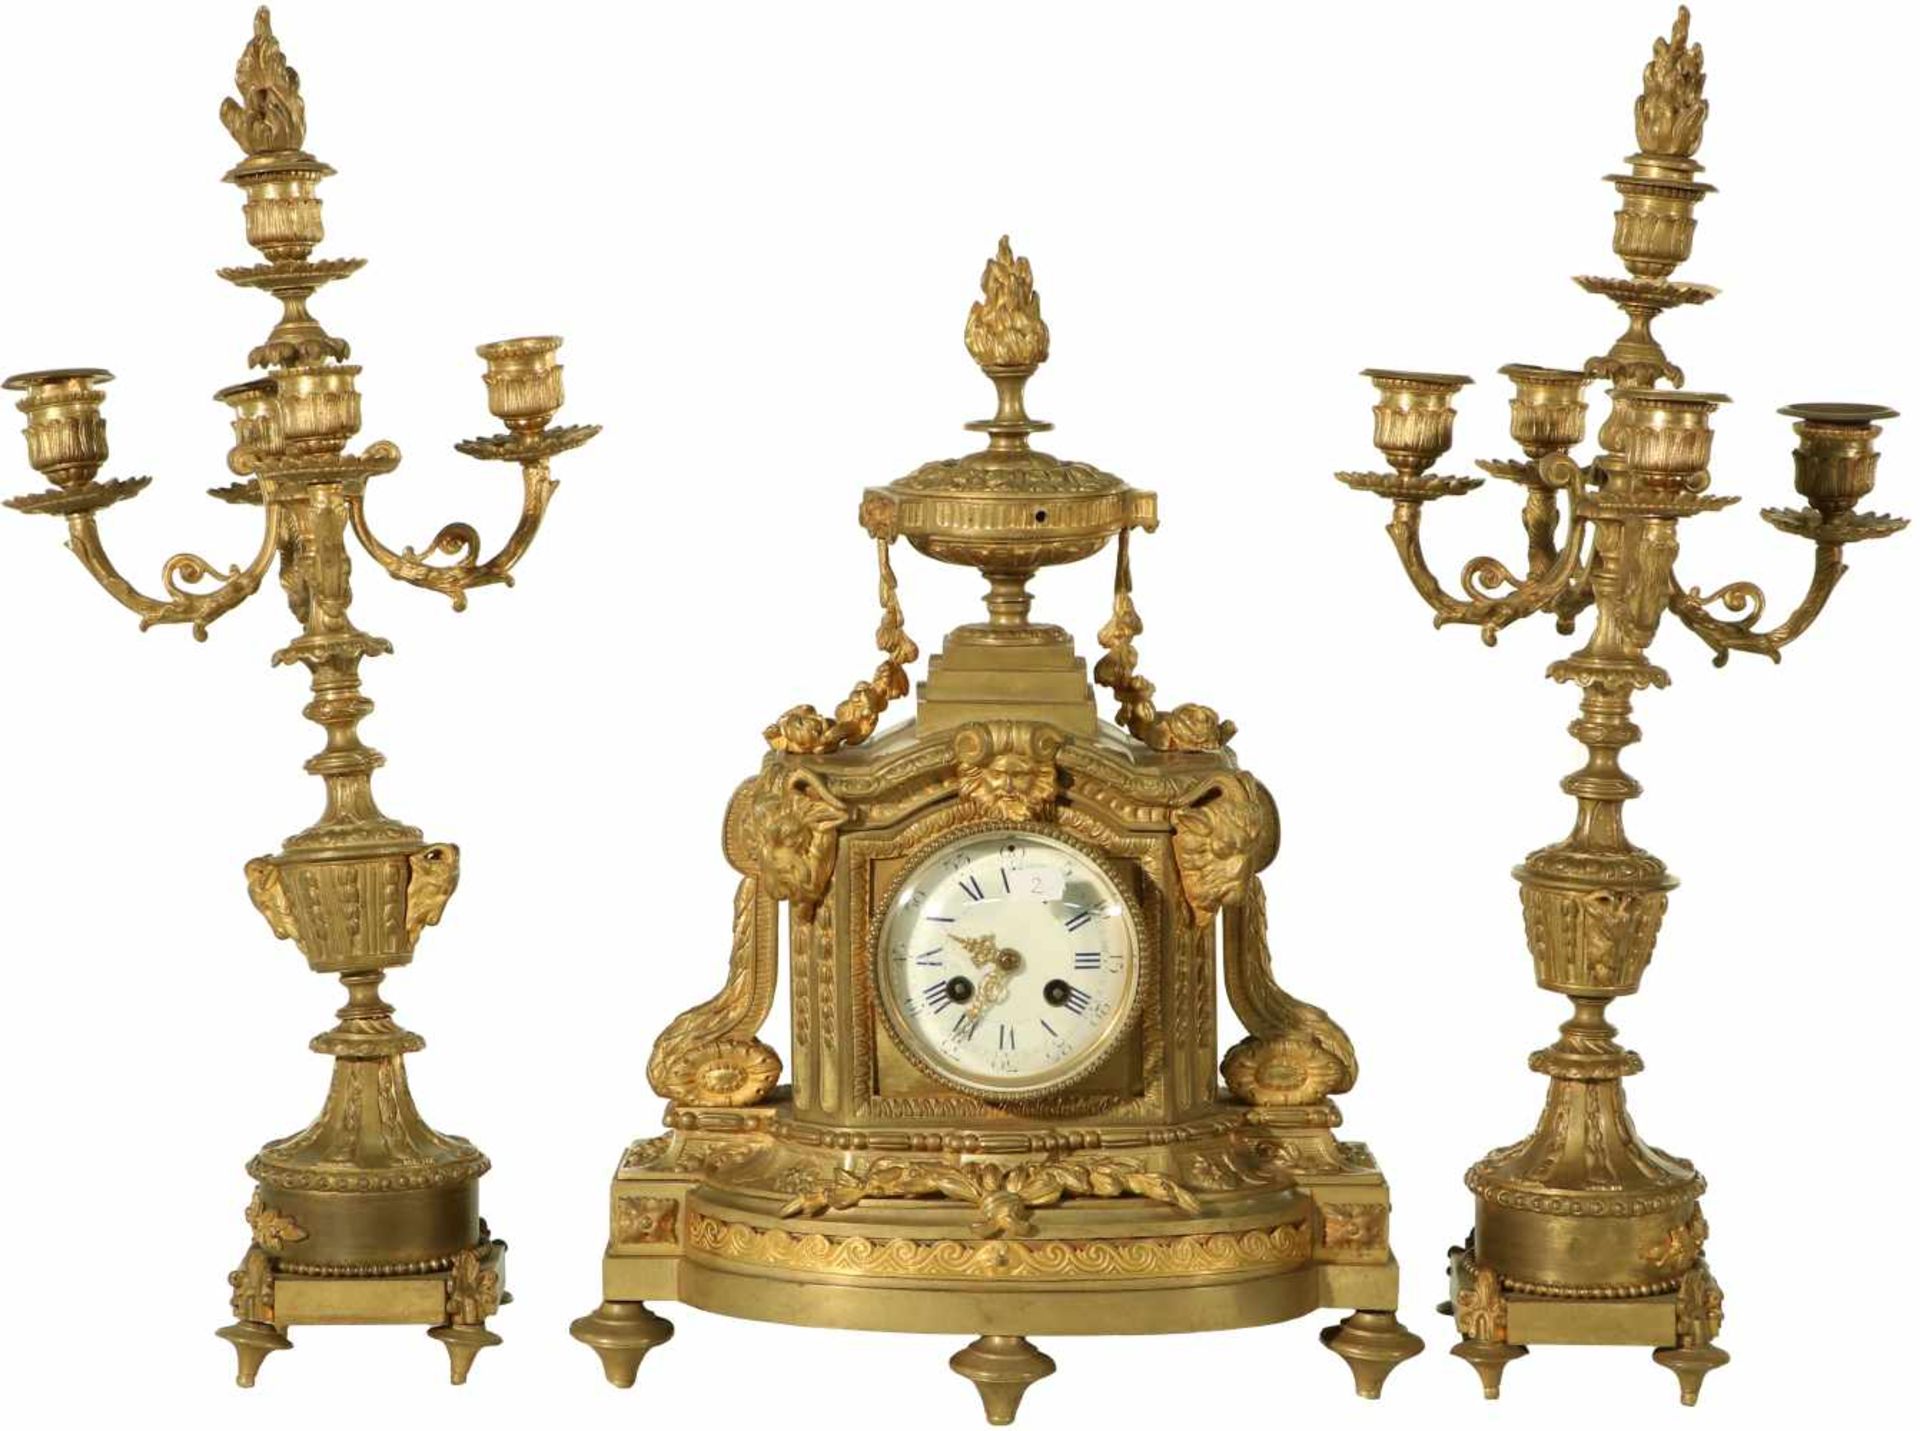 A bronze clock with enamel dial face and two additional candles. France, late 19th century.